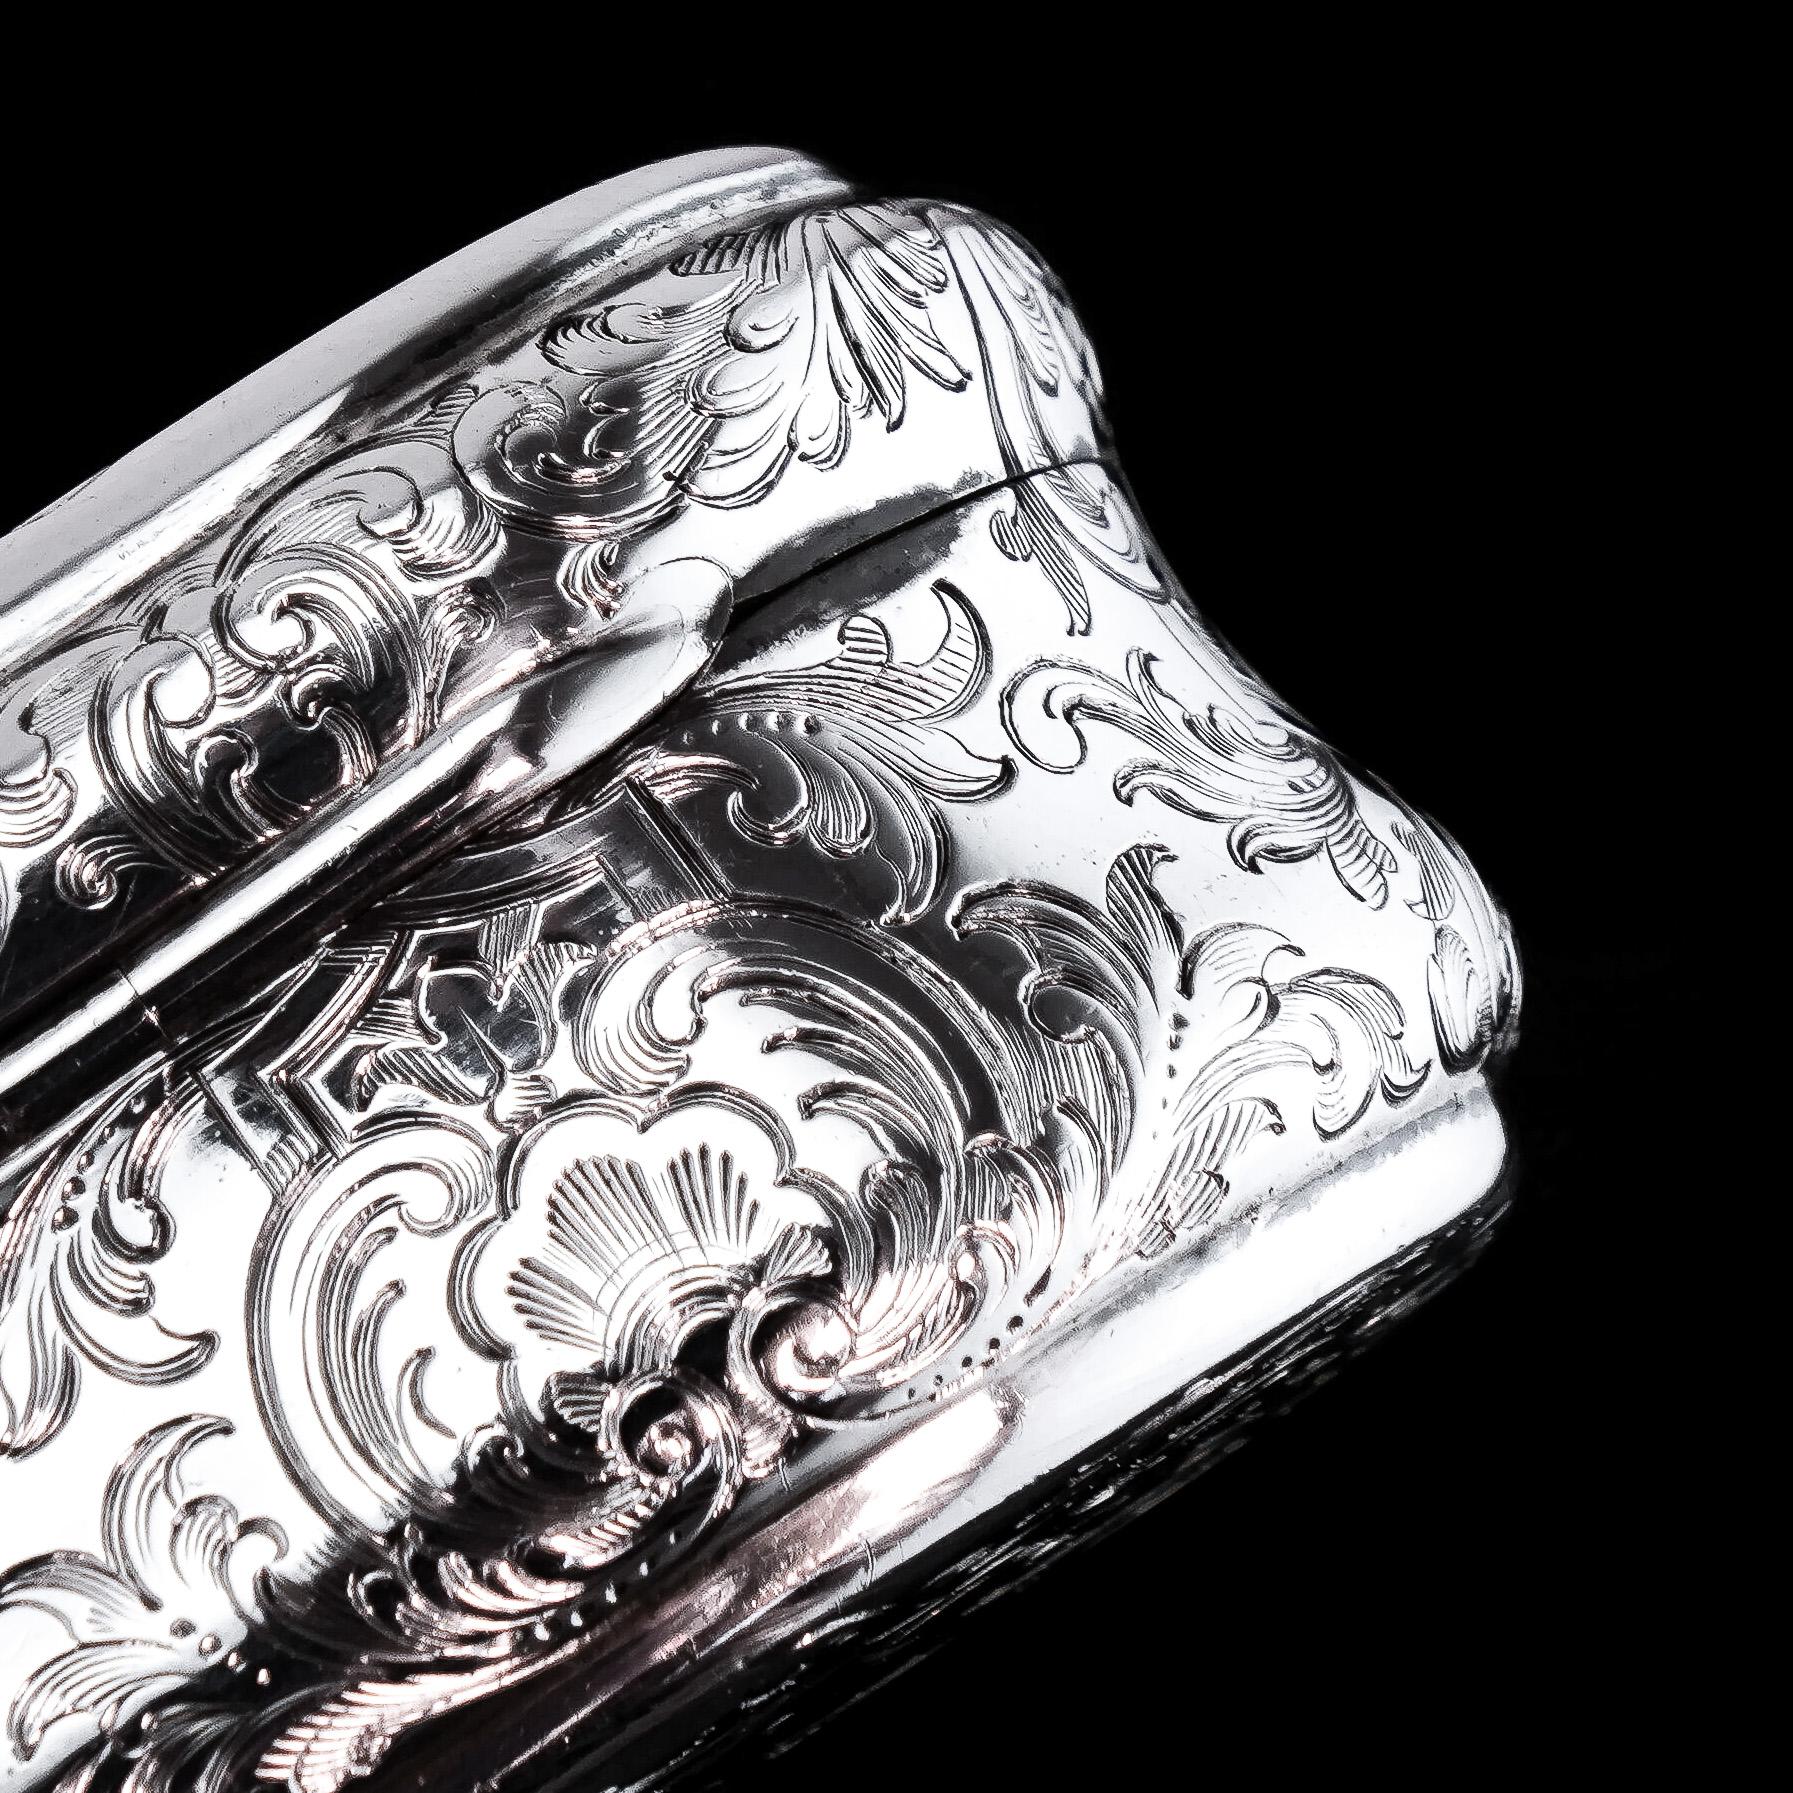 Antique Silver Snuff Box Oblong Shape - Charles Rawlings & William Summers 1849 For Sale 11